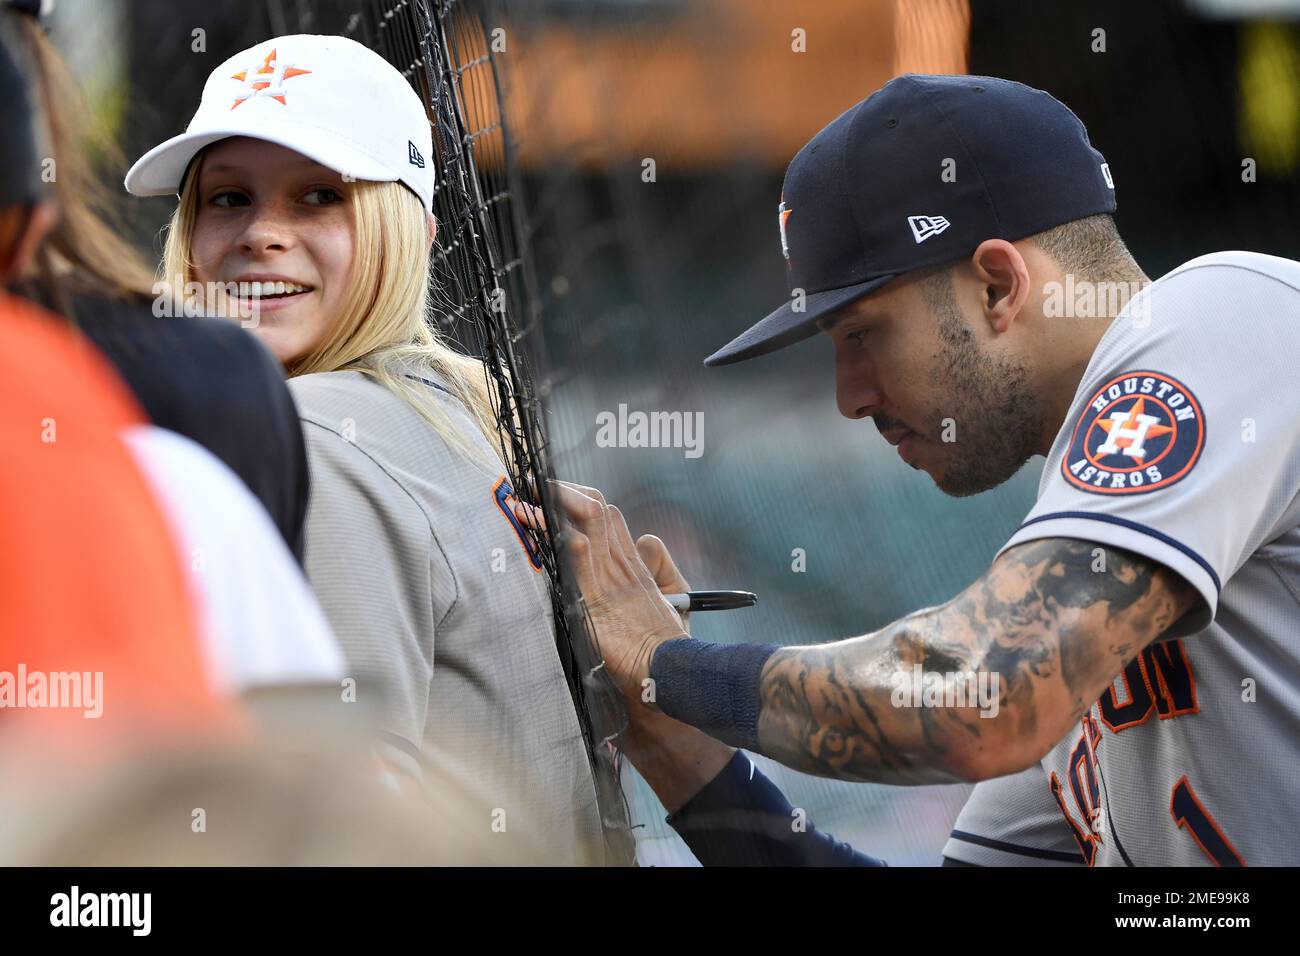 There is now photo evidence of the tattoo Carlos Correa was